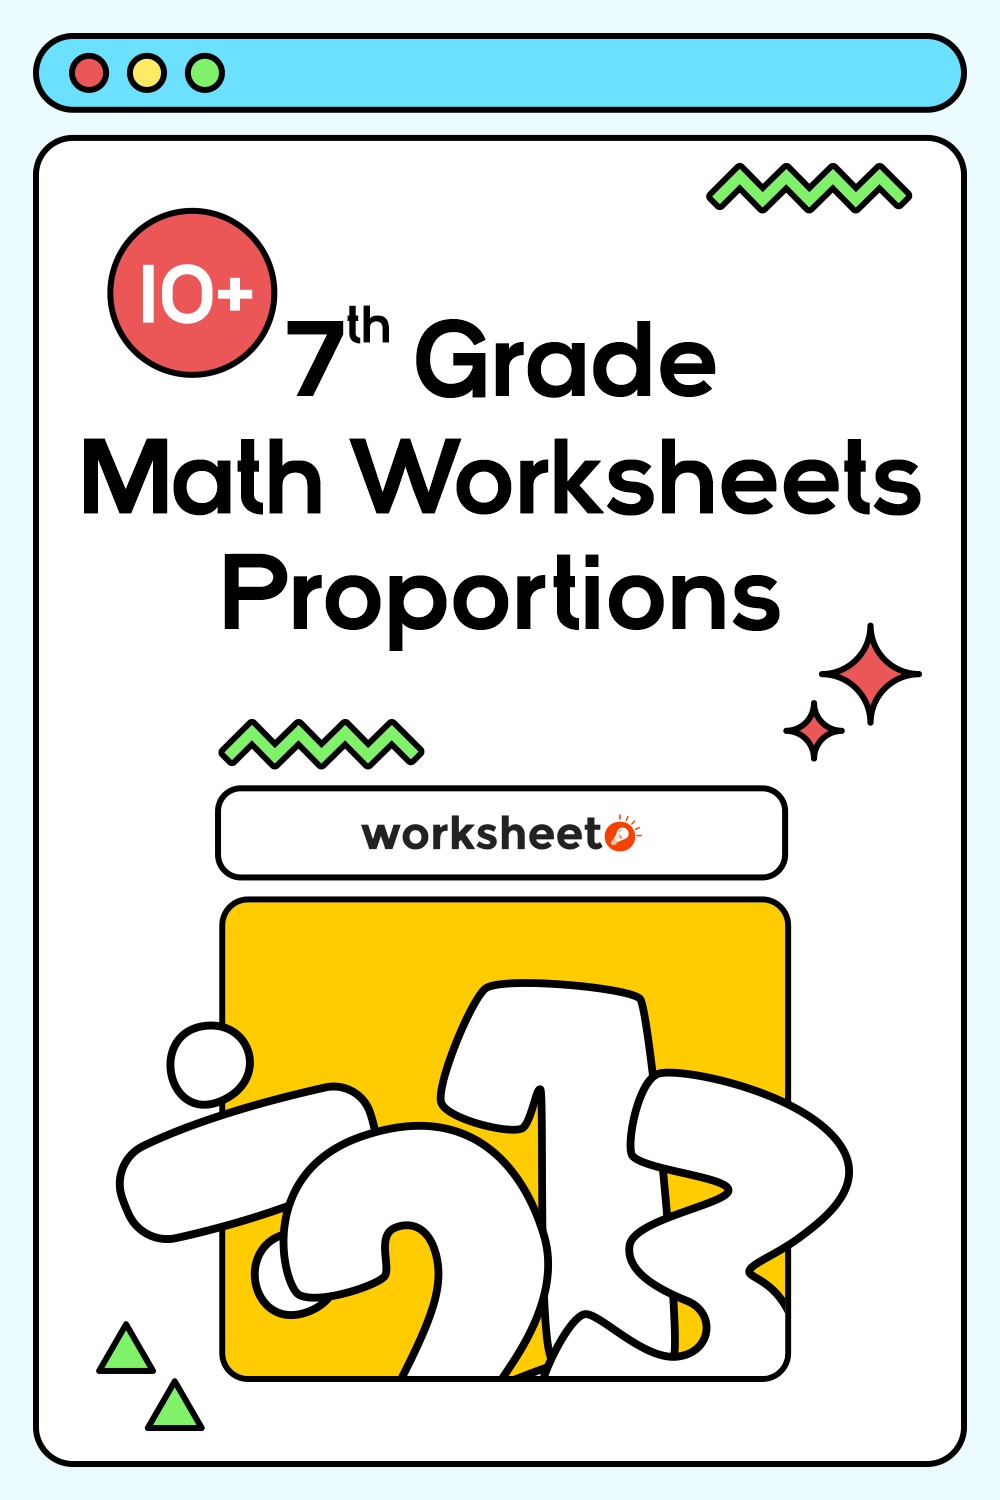 7th Grade Math Worksheets Proportions